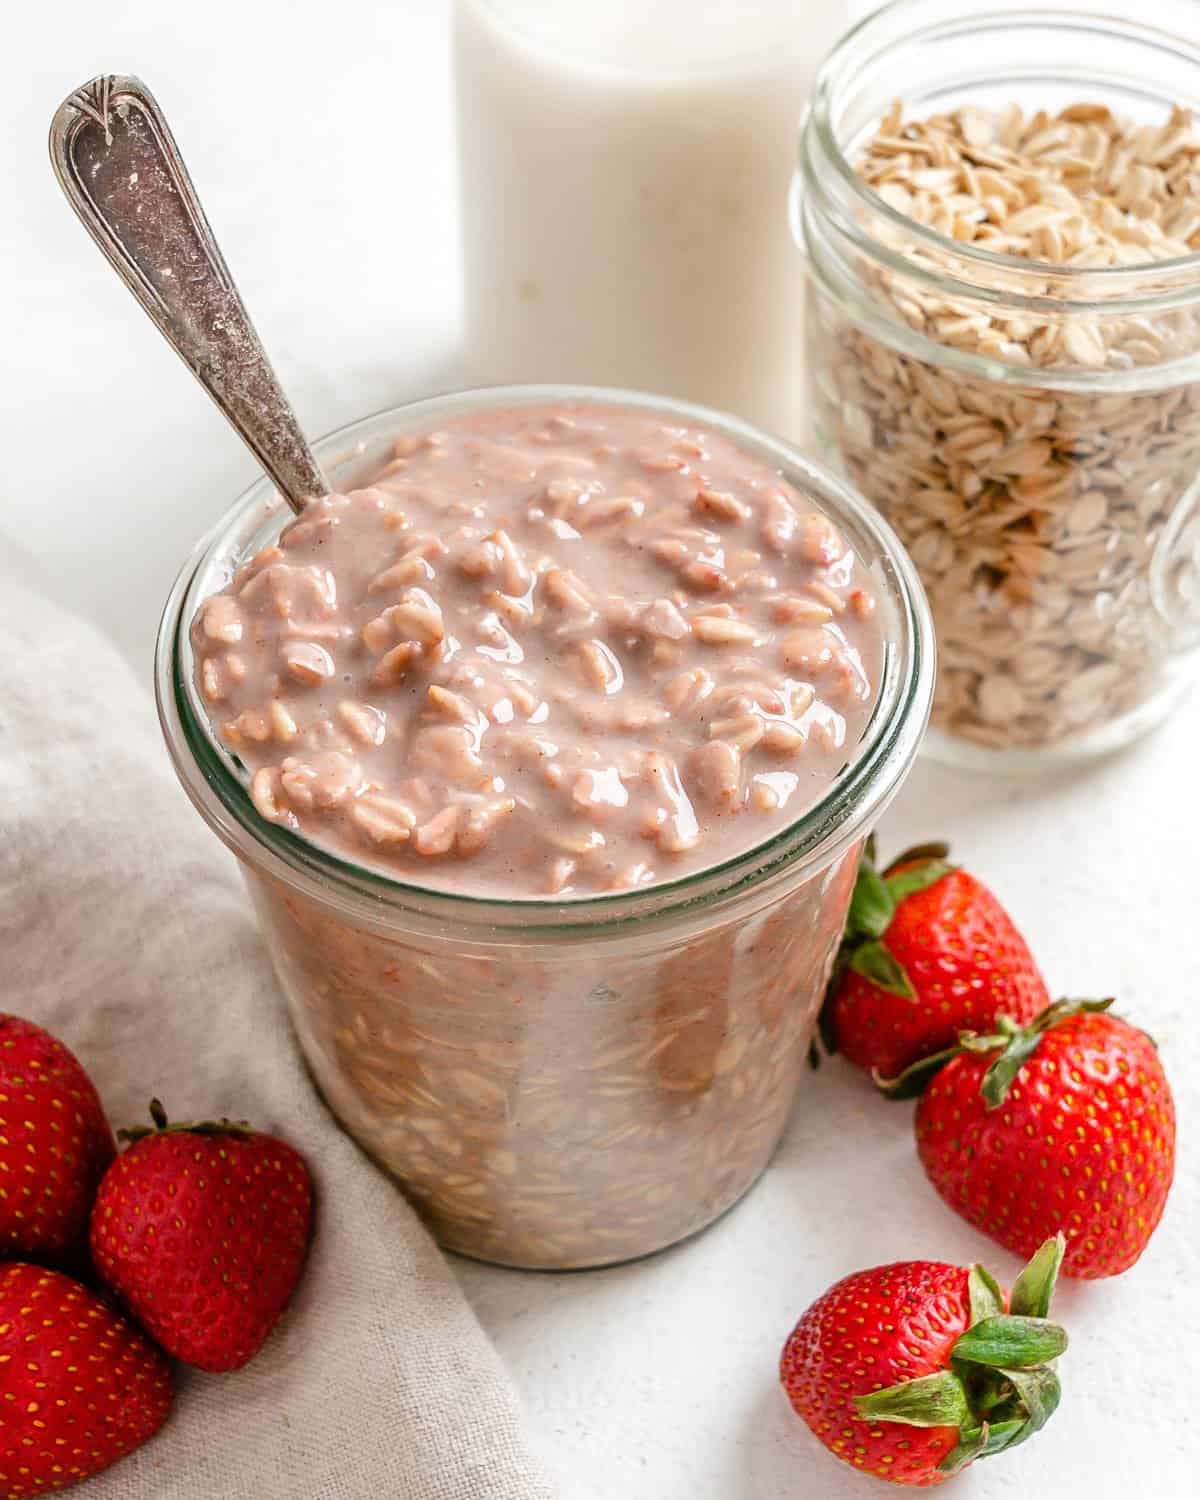 completed Vegan Strawberry Overnight Oats in two glass jars with strawberries in the forefront on a white surface